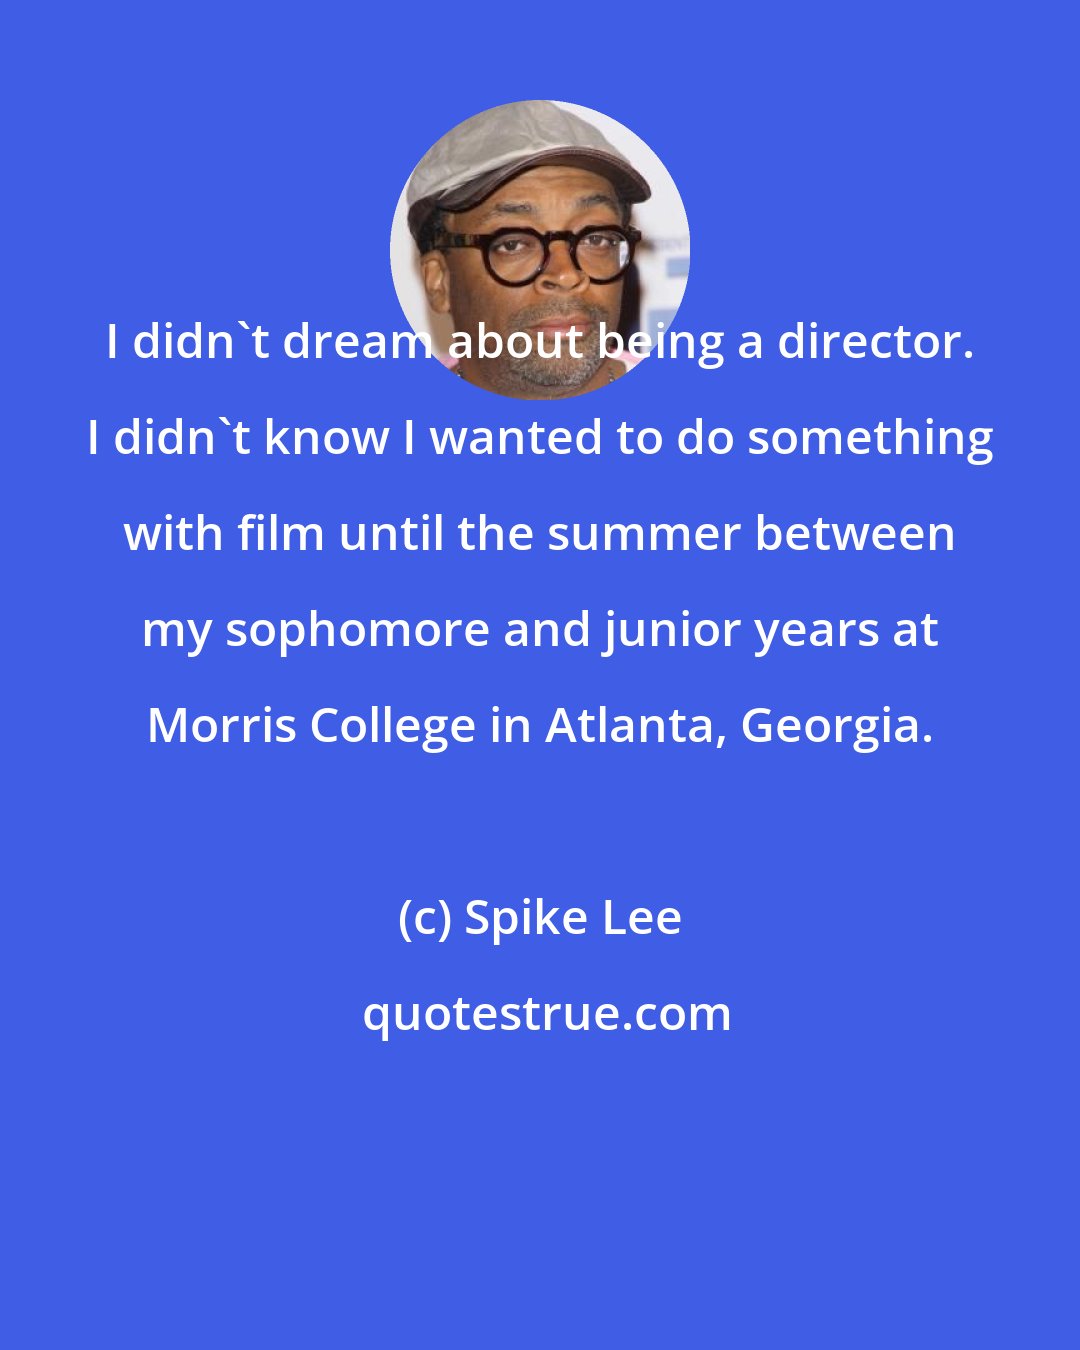 Spike Lee: I didn't dream about being a director. I didn't know I wanted to do something with film until the summer between my sophomore and junior years at Morris College in Atlanta, Georgia.